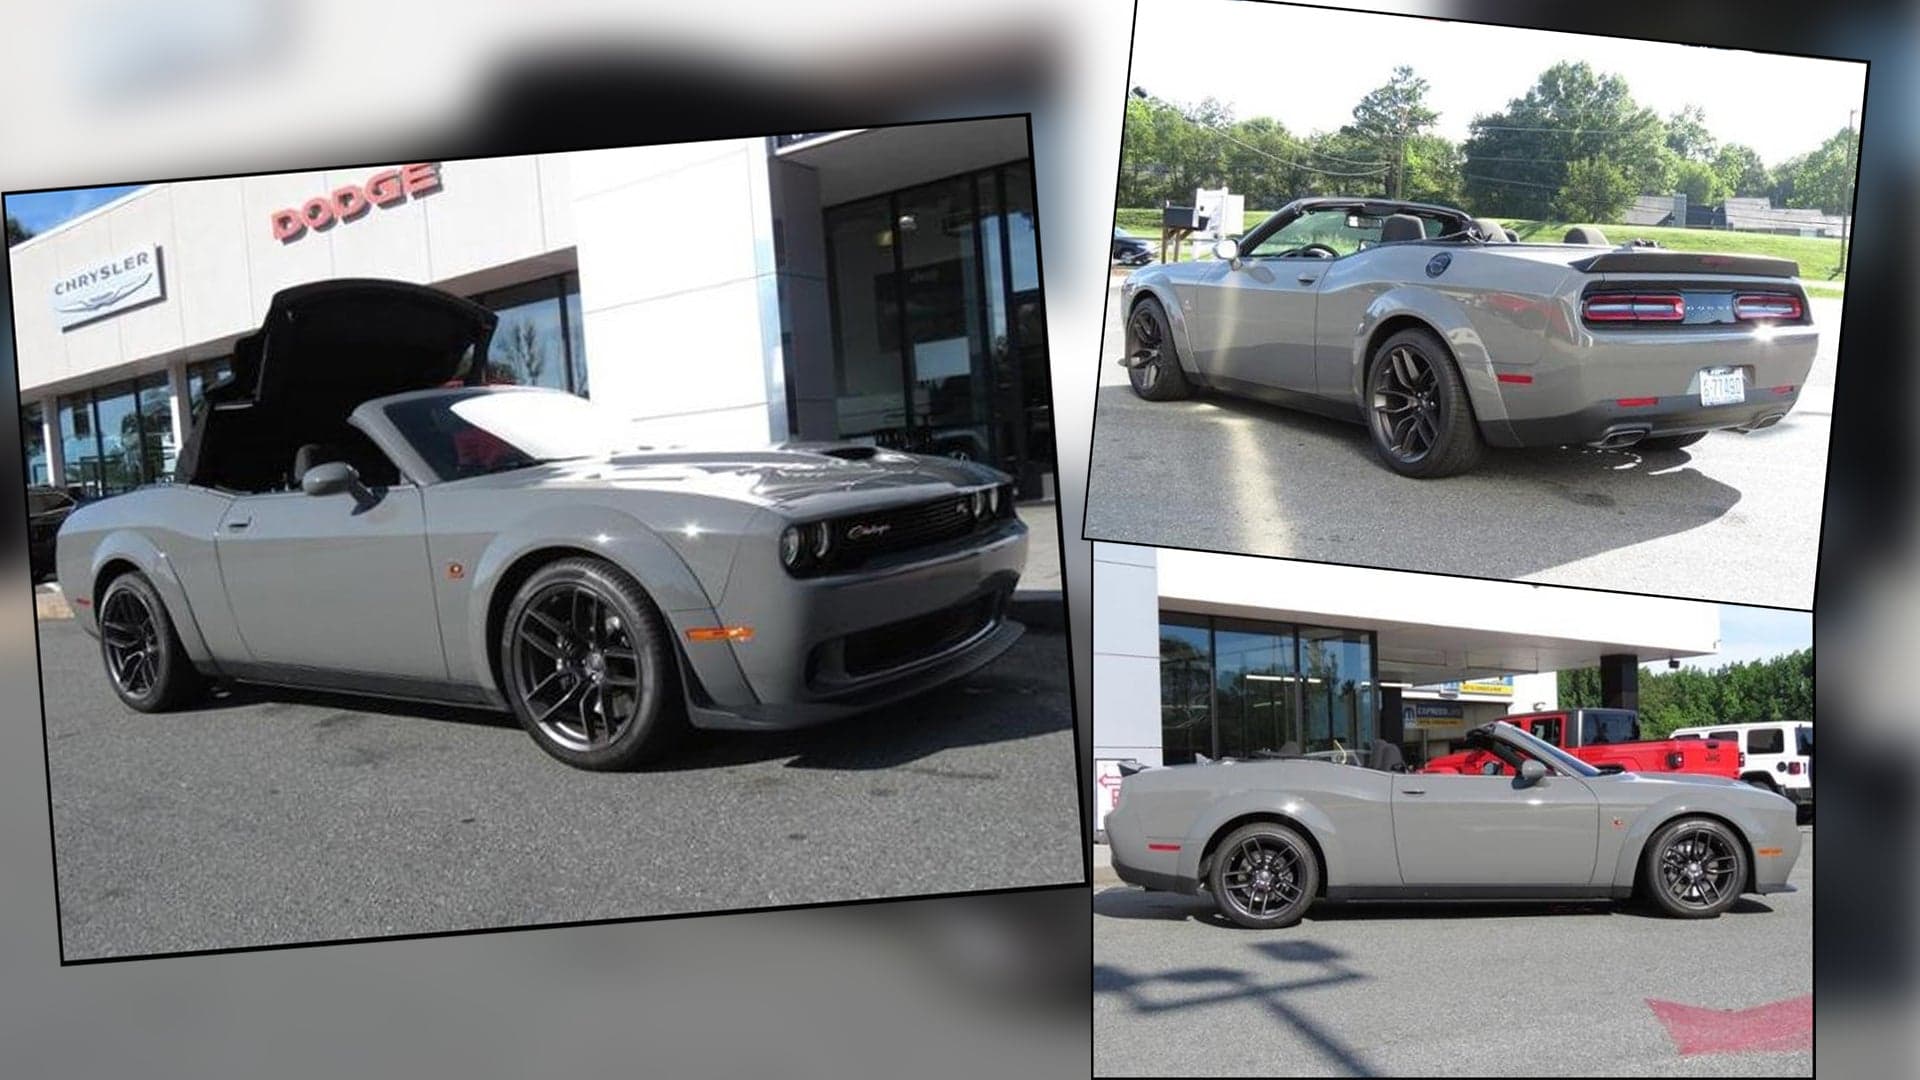 Custom 2019 Dodge Challenger R/T Scat Pack Convertible Is a Droptop Dream for $64K